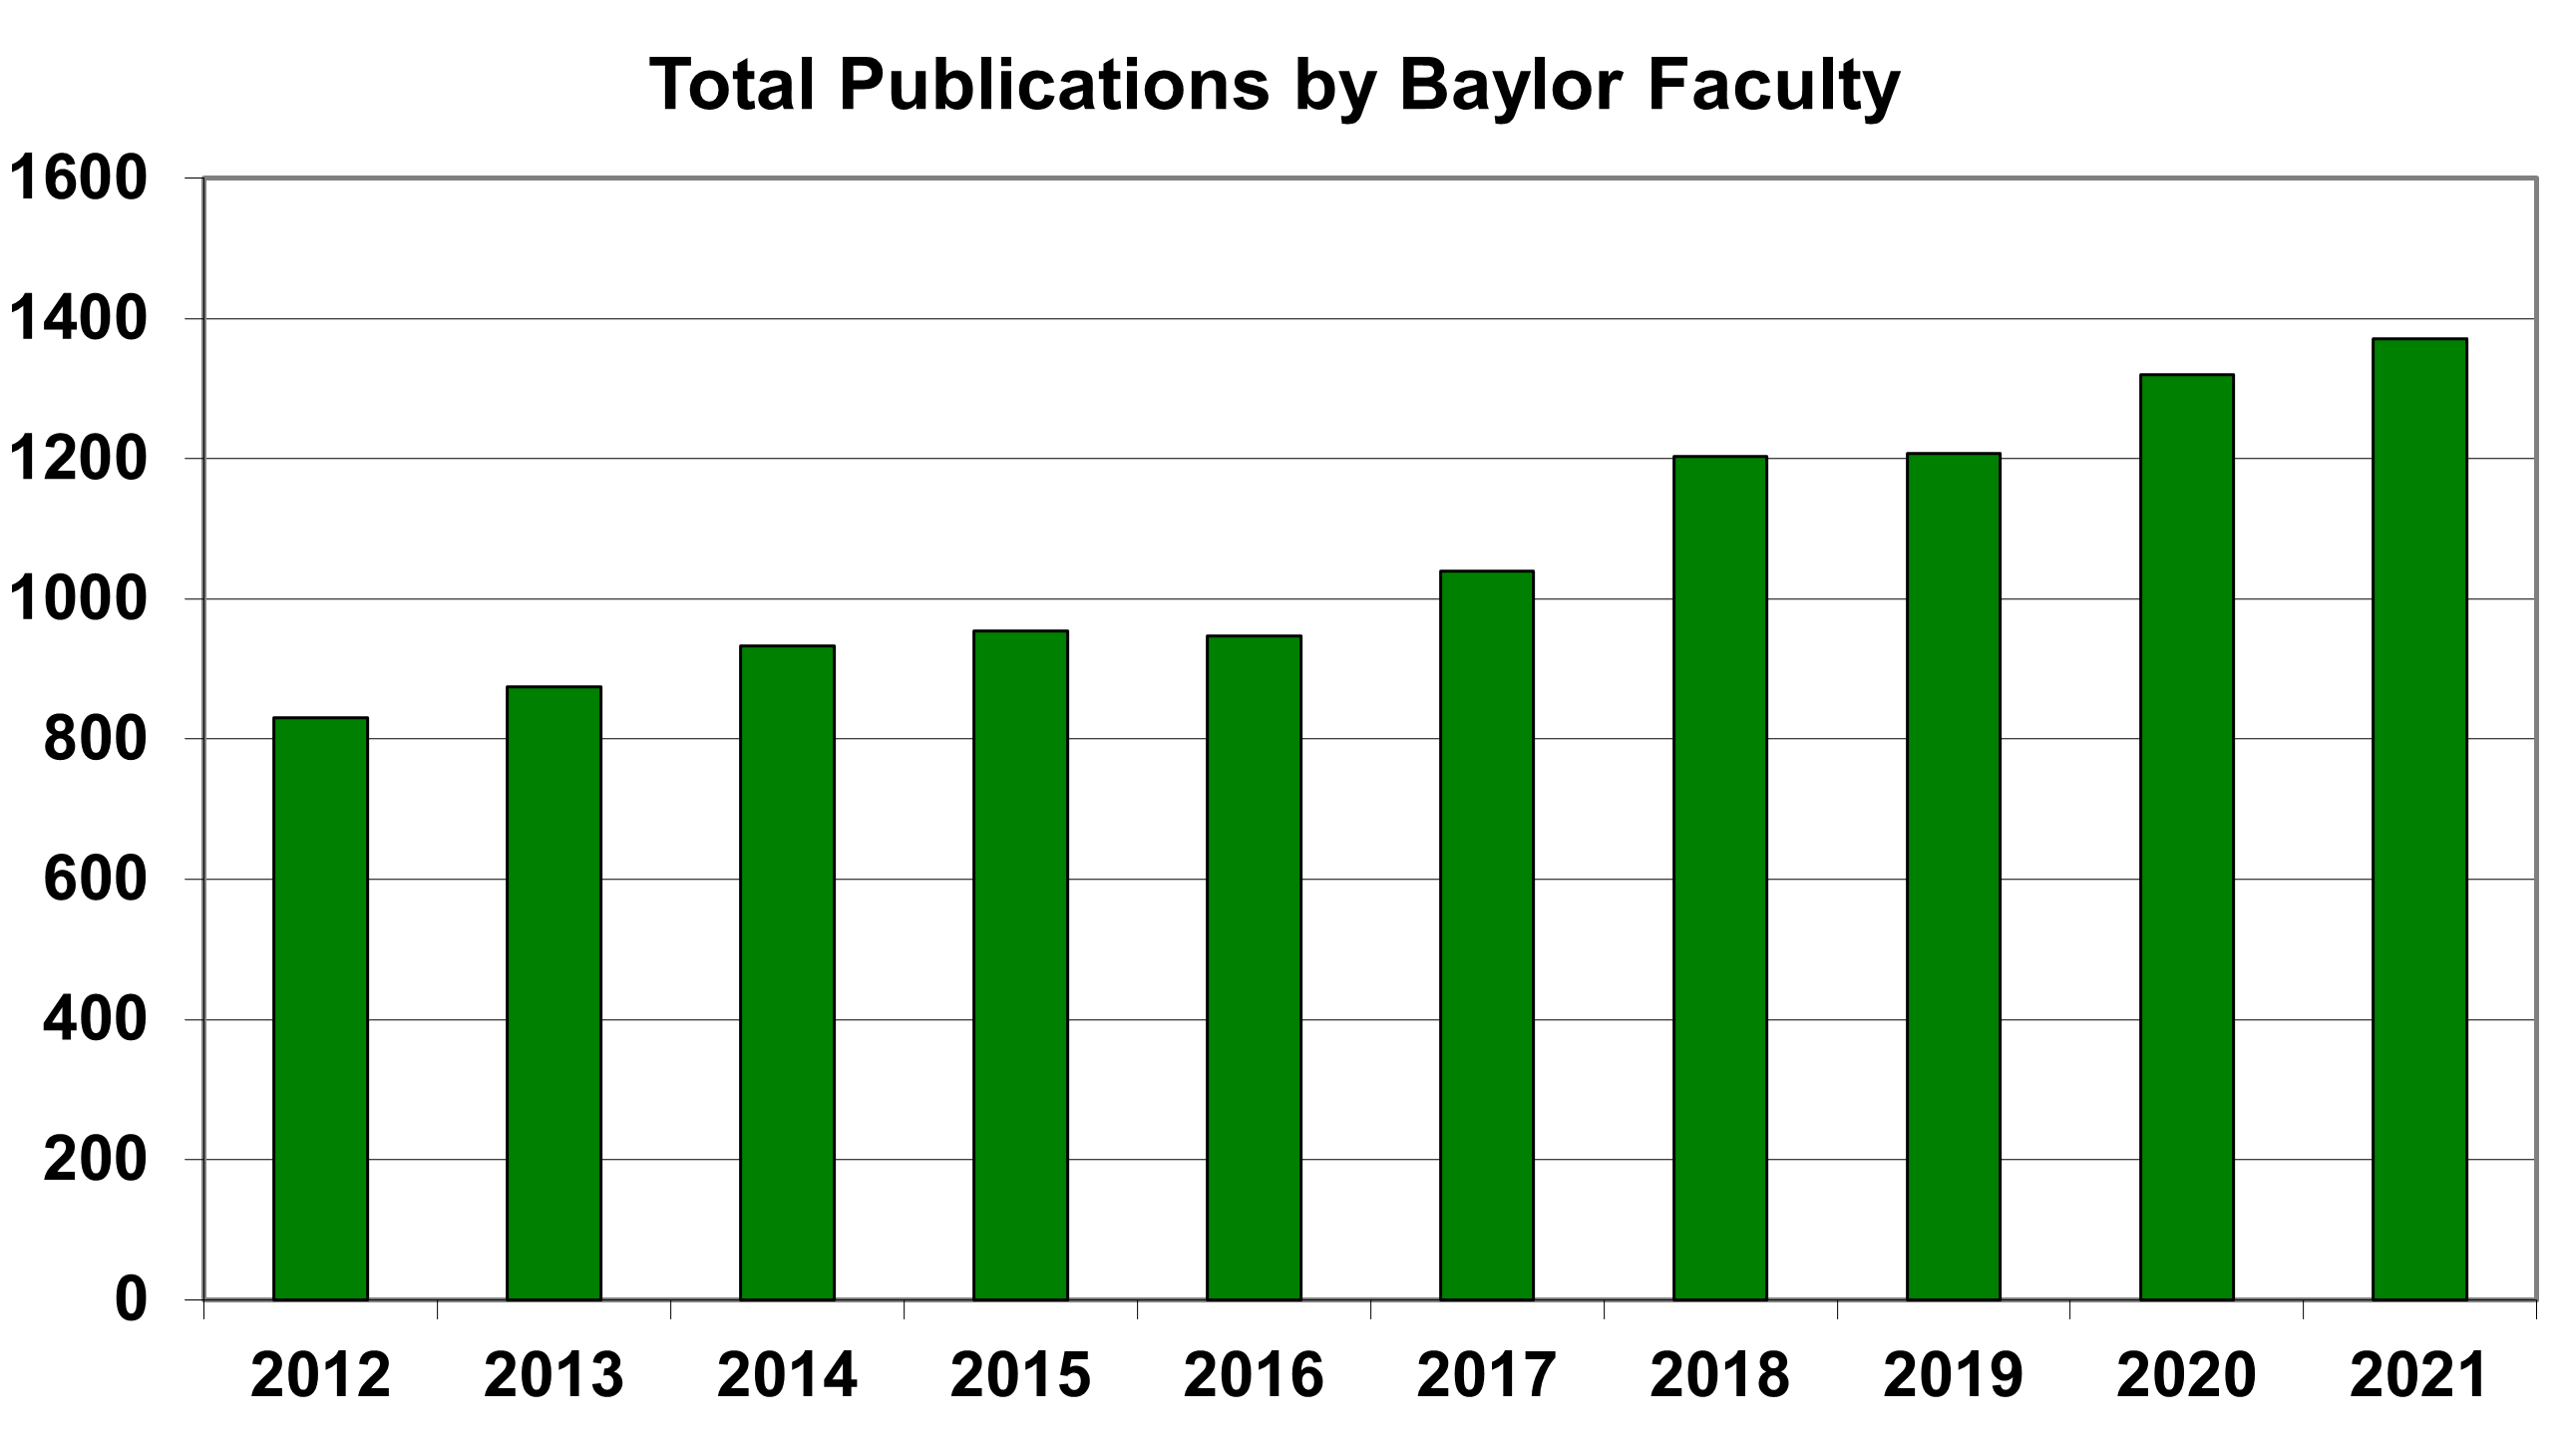 chart showing growth in number of faculty publications per year